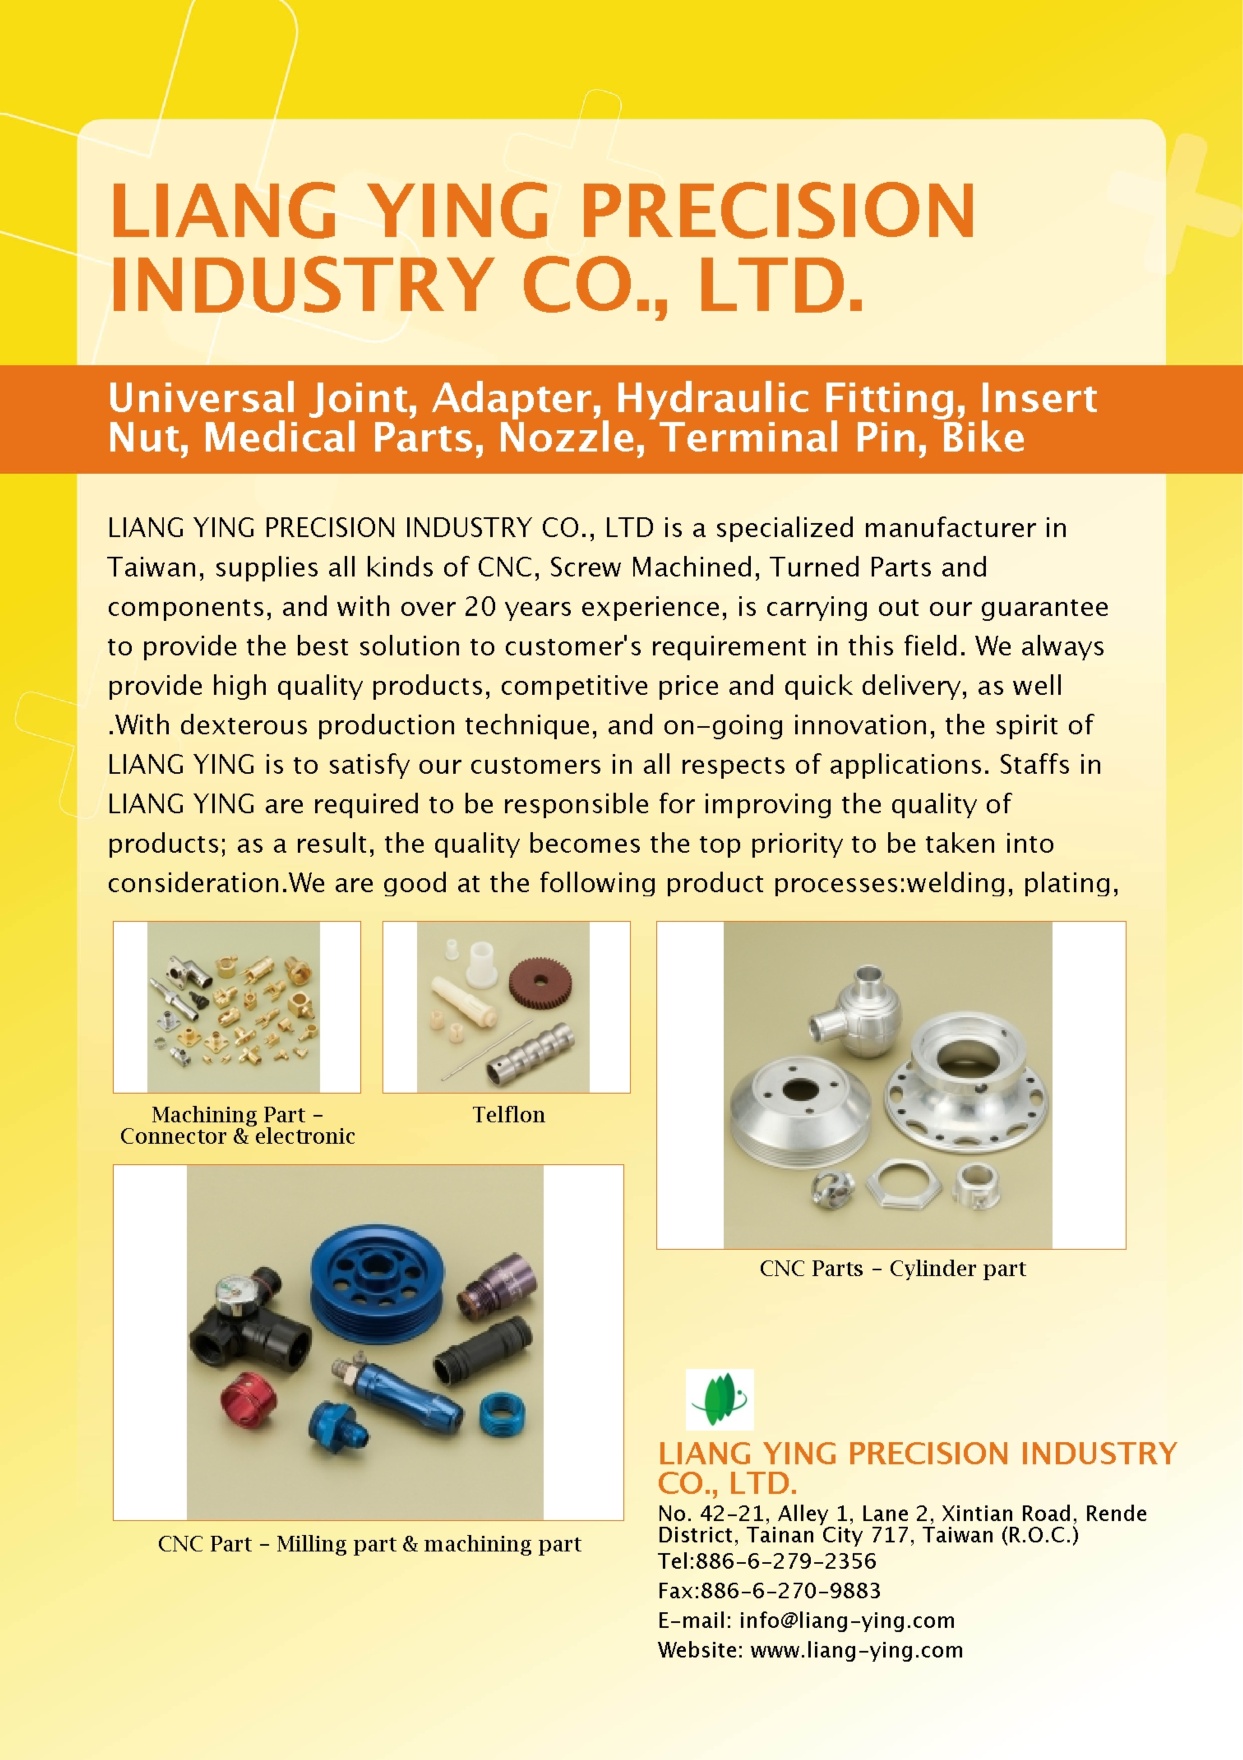 LIANG YING PRECISION INDUSTRY CO., LTD.